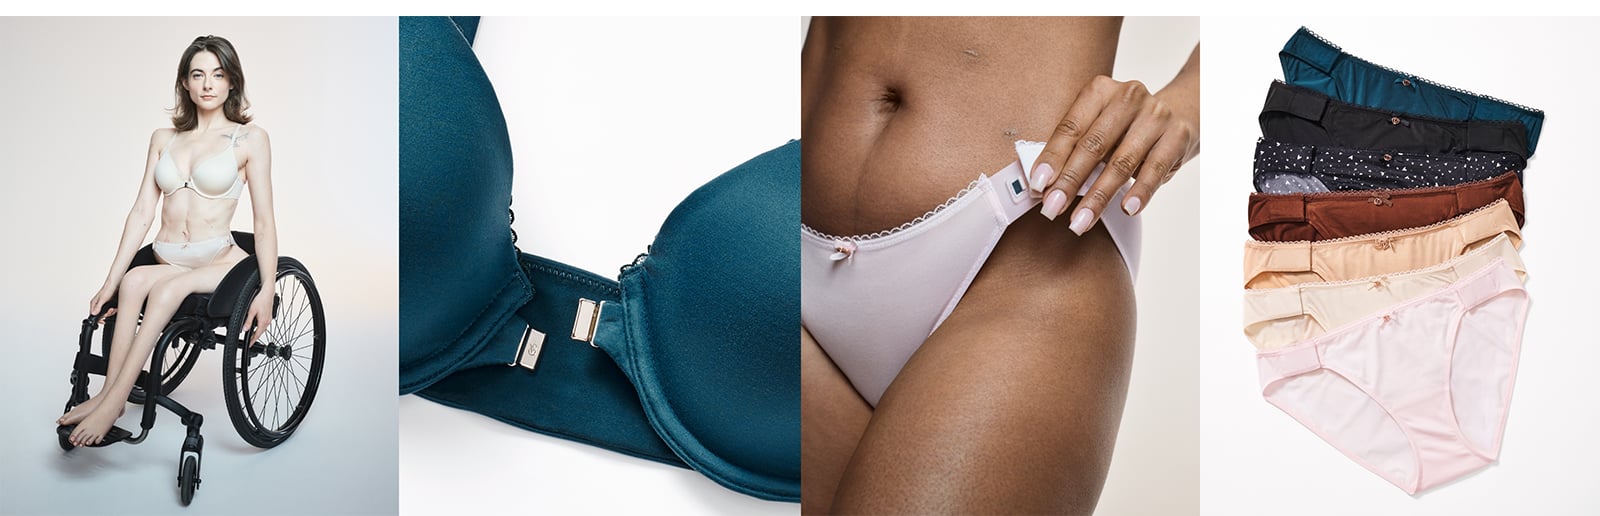 A collage of images of VS Adaptive bra and panties showing the magnetic closures and a model sitting in a wheelchair wearing a white VS Adaptive bra and panty.